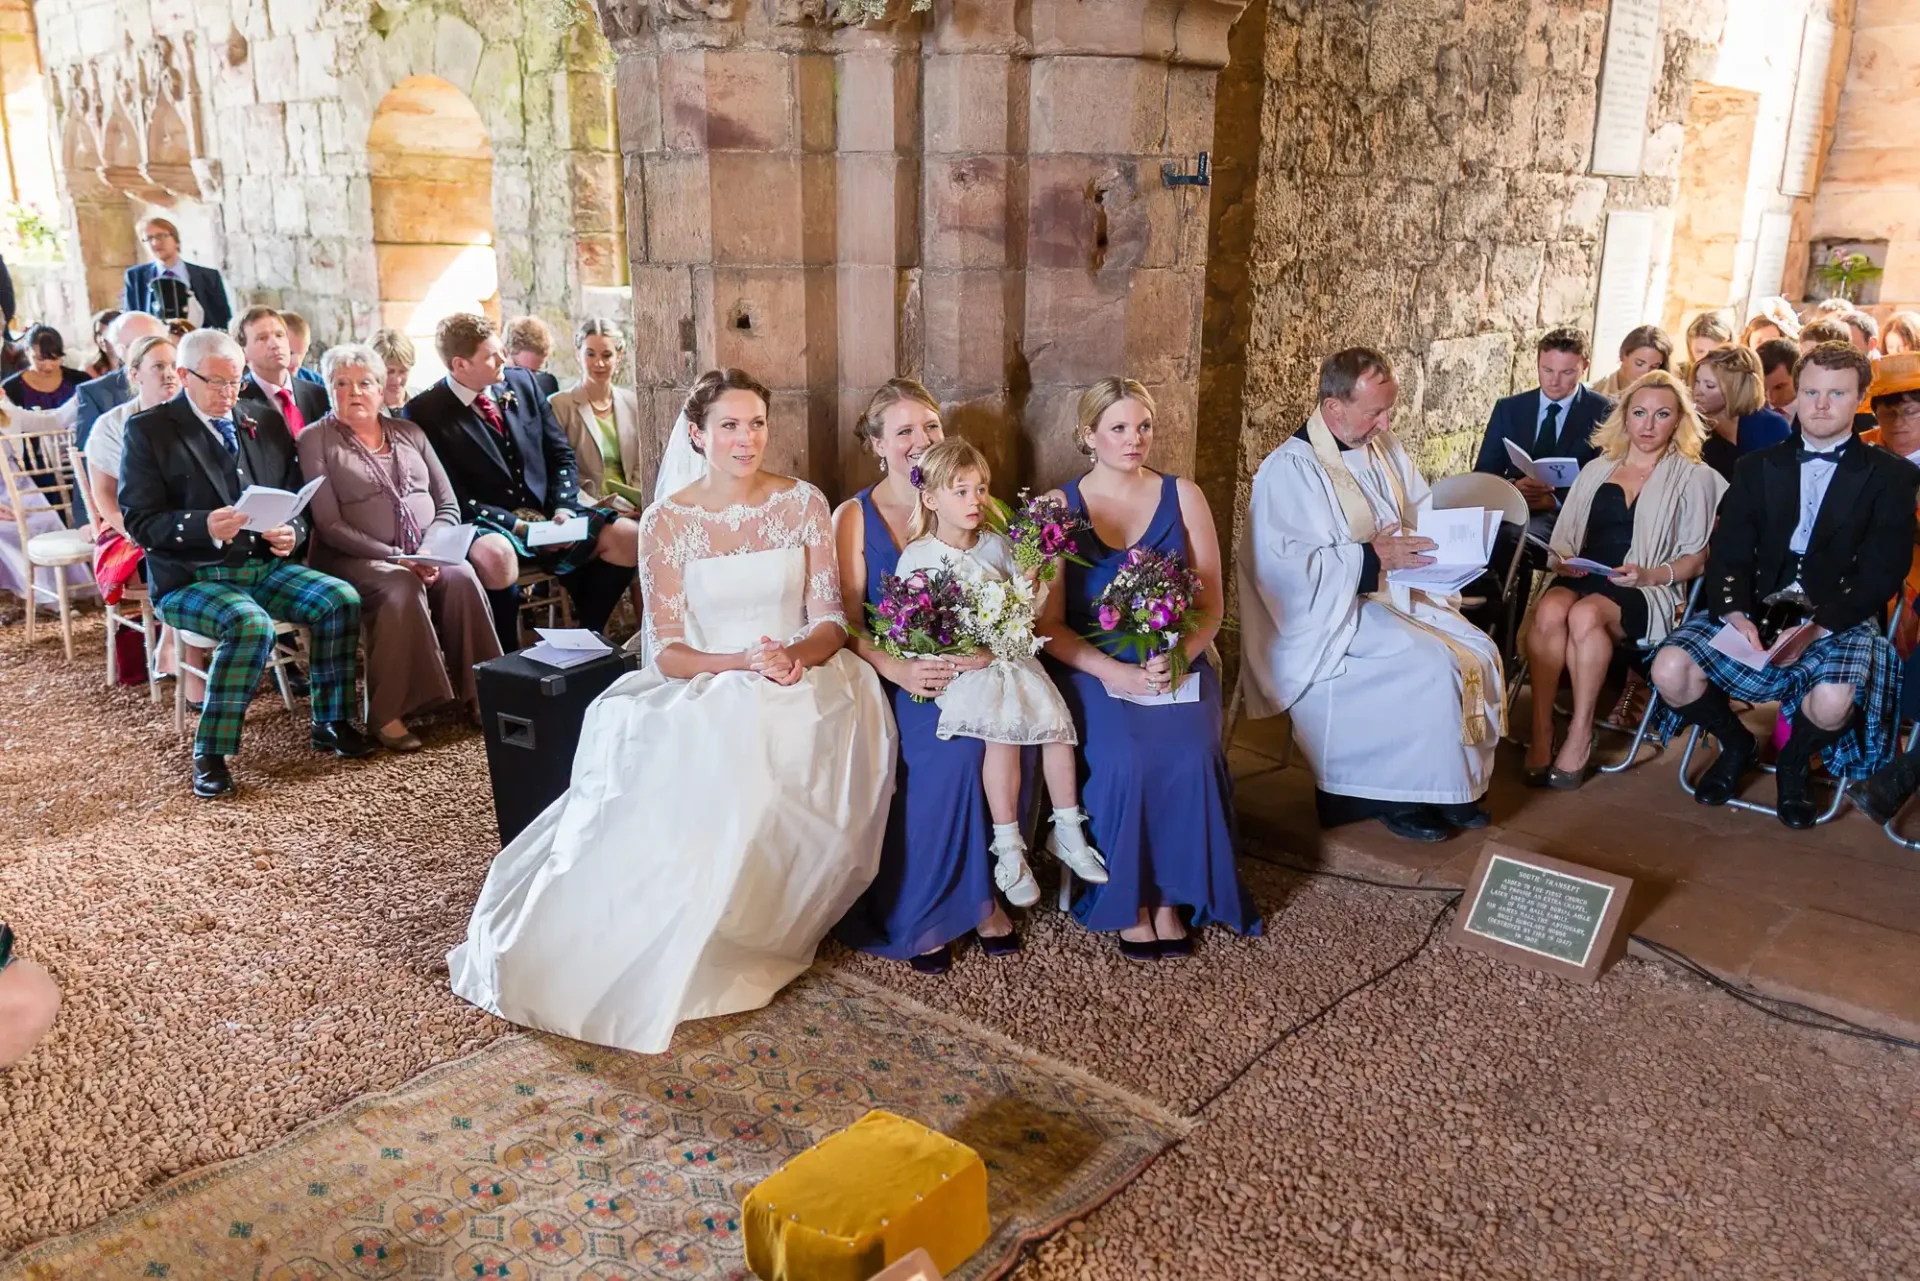 A wedding ceremony in a historic venue with guests in traditional and formal attire, featuring a bride in white and attendees in various colorful outfits.